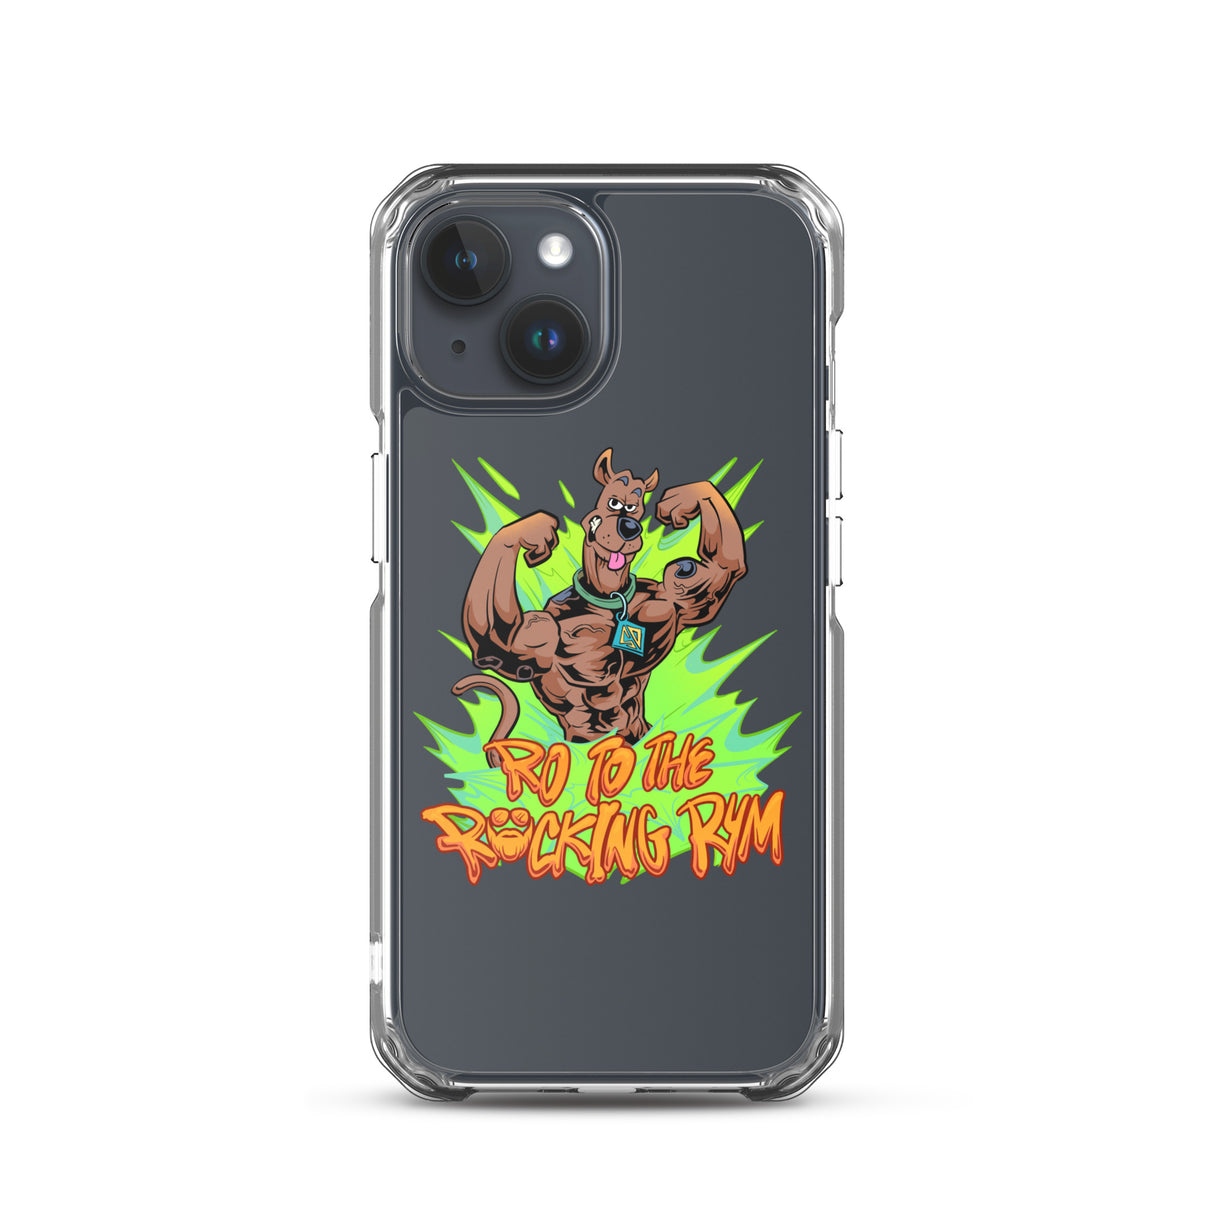 Scooby iPhone Case